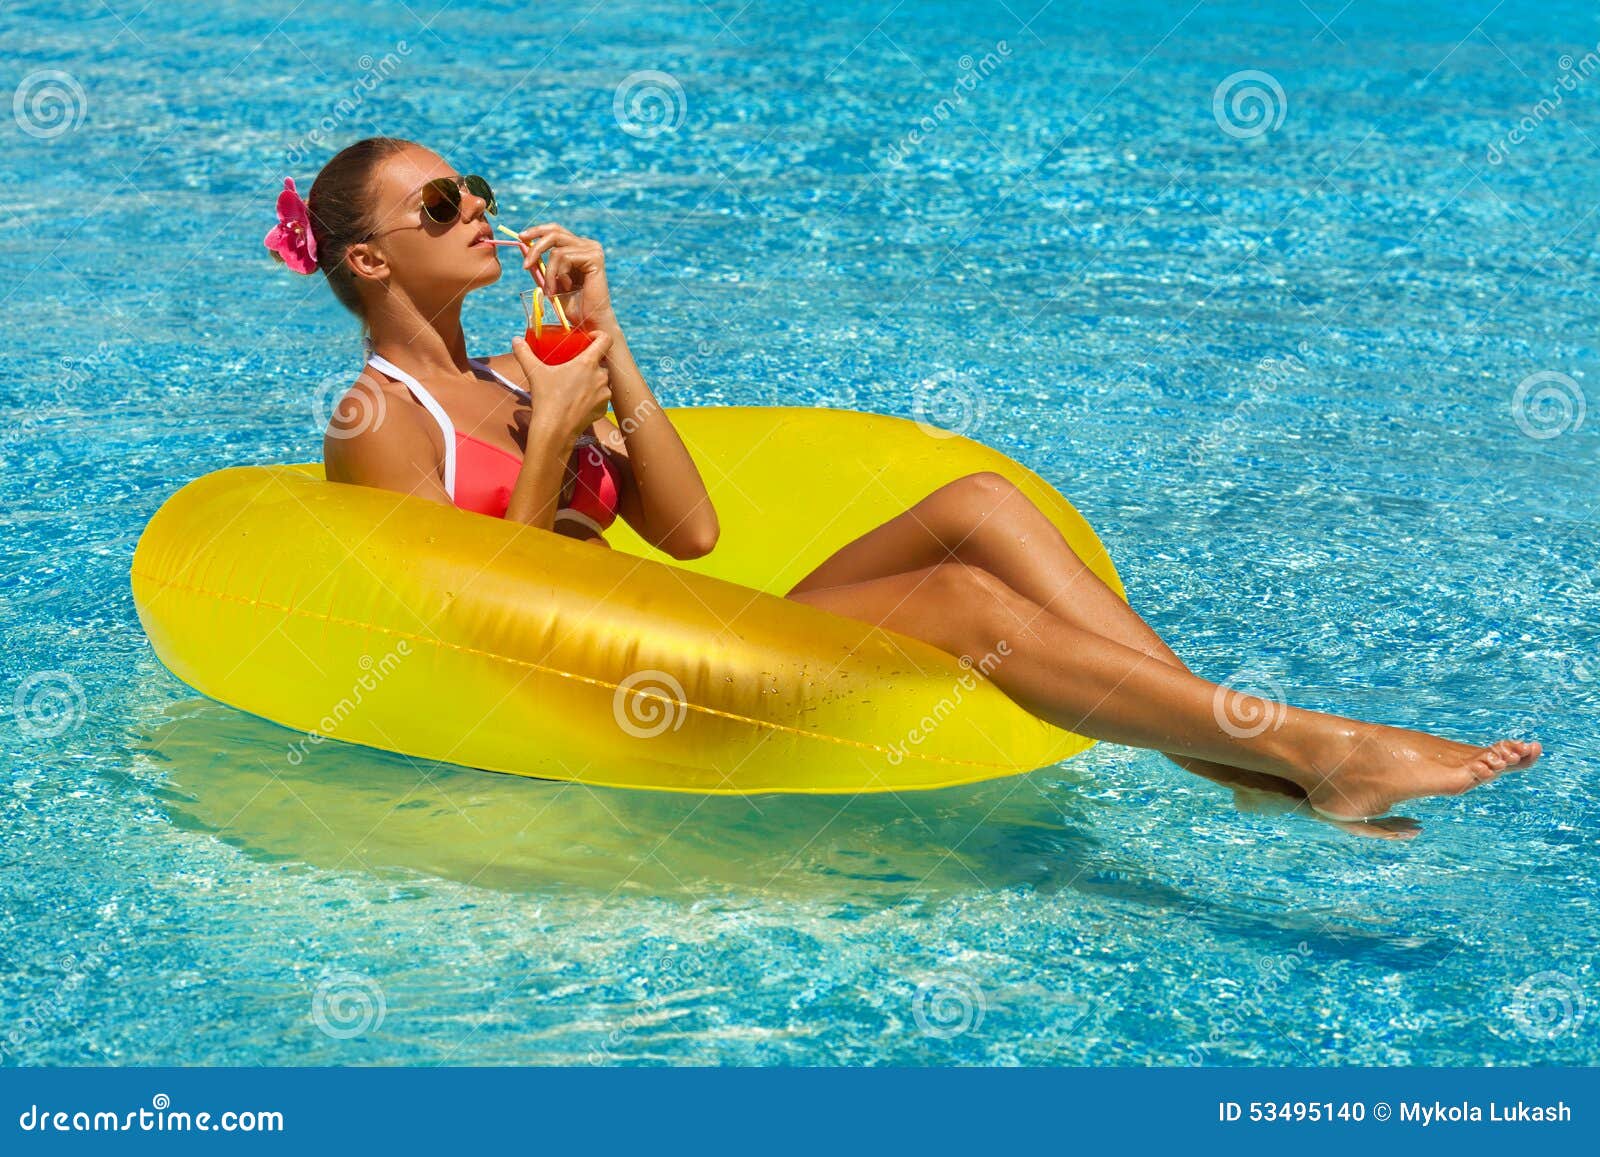 woman in bikini enjoying summer sun and tanning during holidays in pool with a cocktail